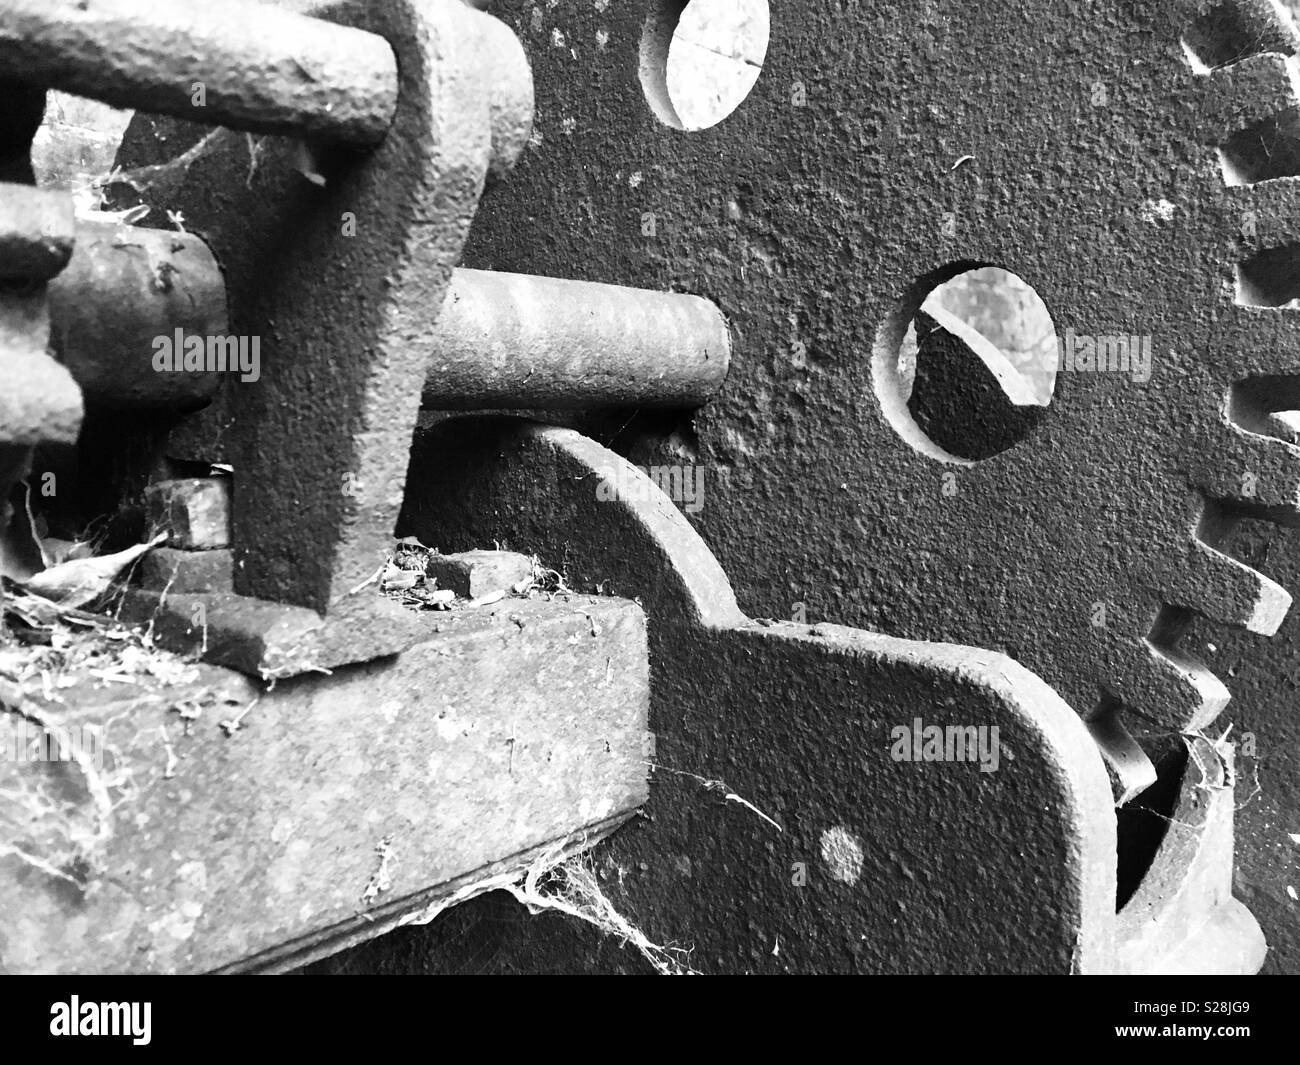 Cogs and mechanical parts of the metal machinery used to move sluice gates, Stock Photo